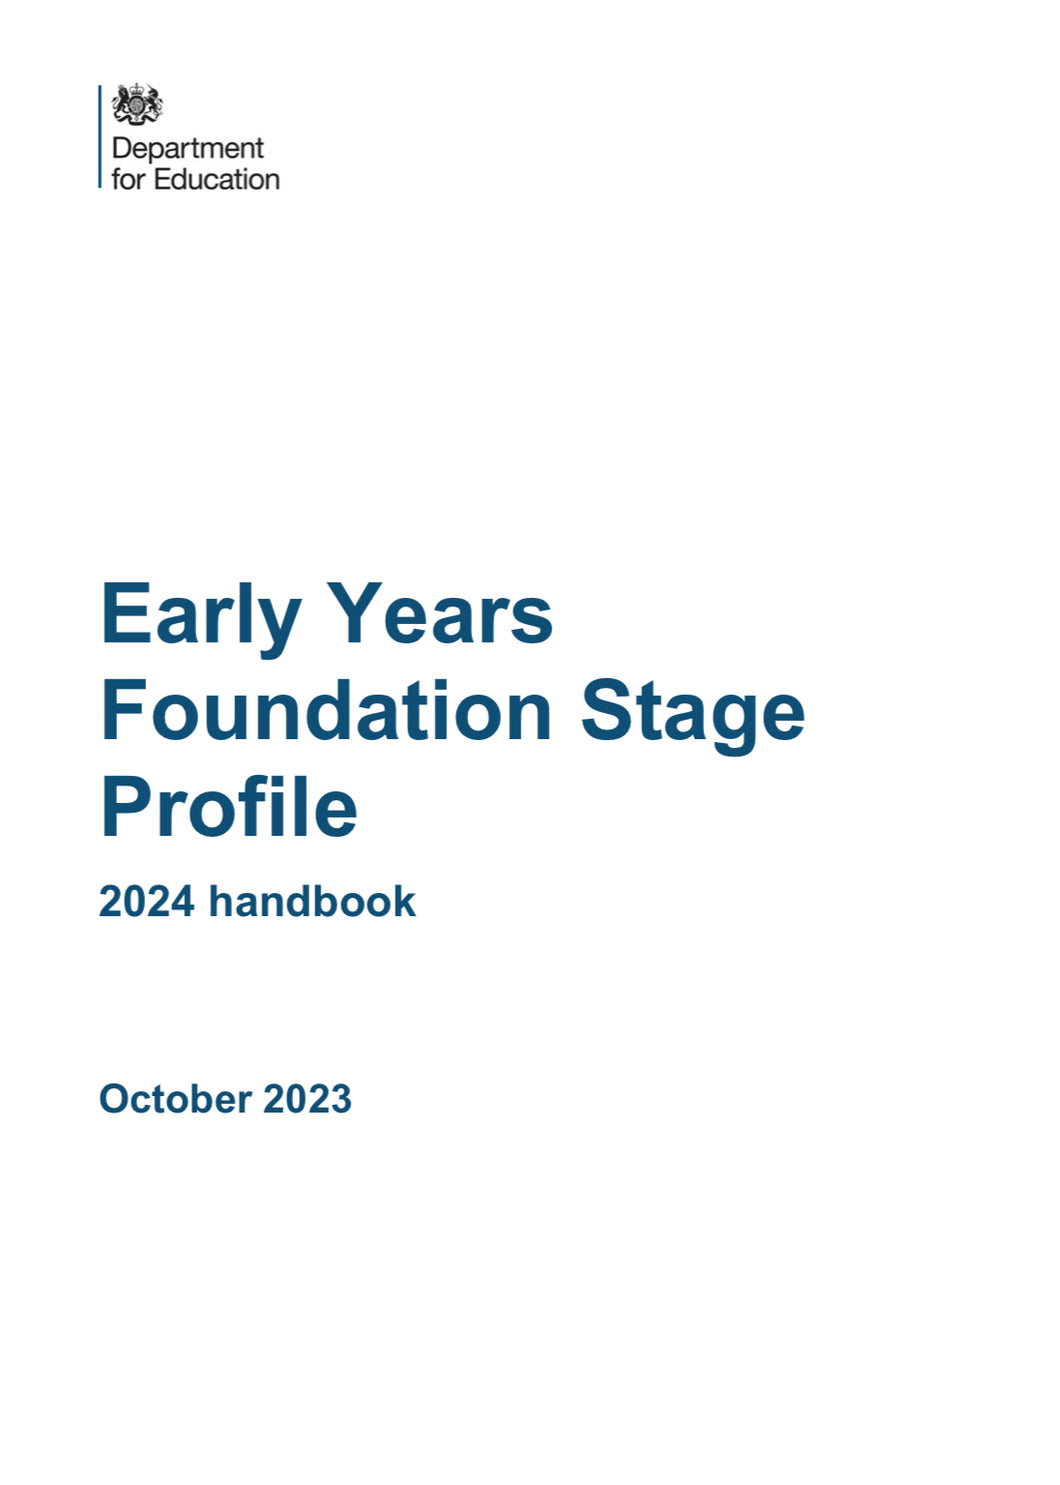 Early Years Foundation Stage Profile Handbook 2024